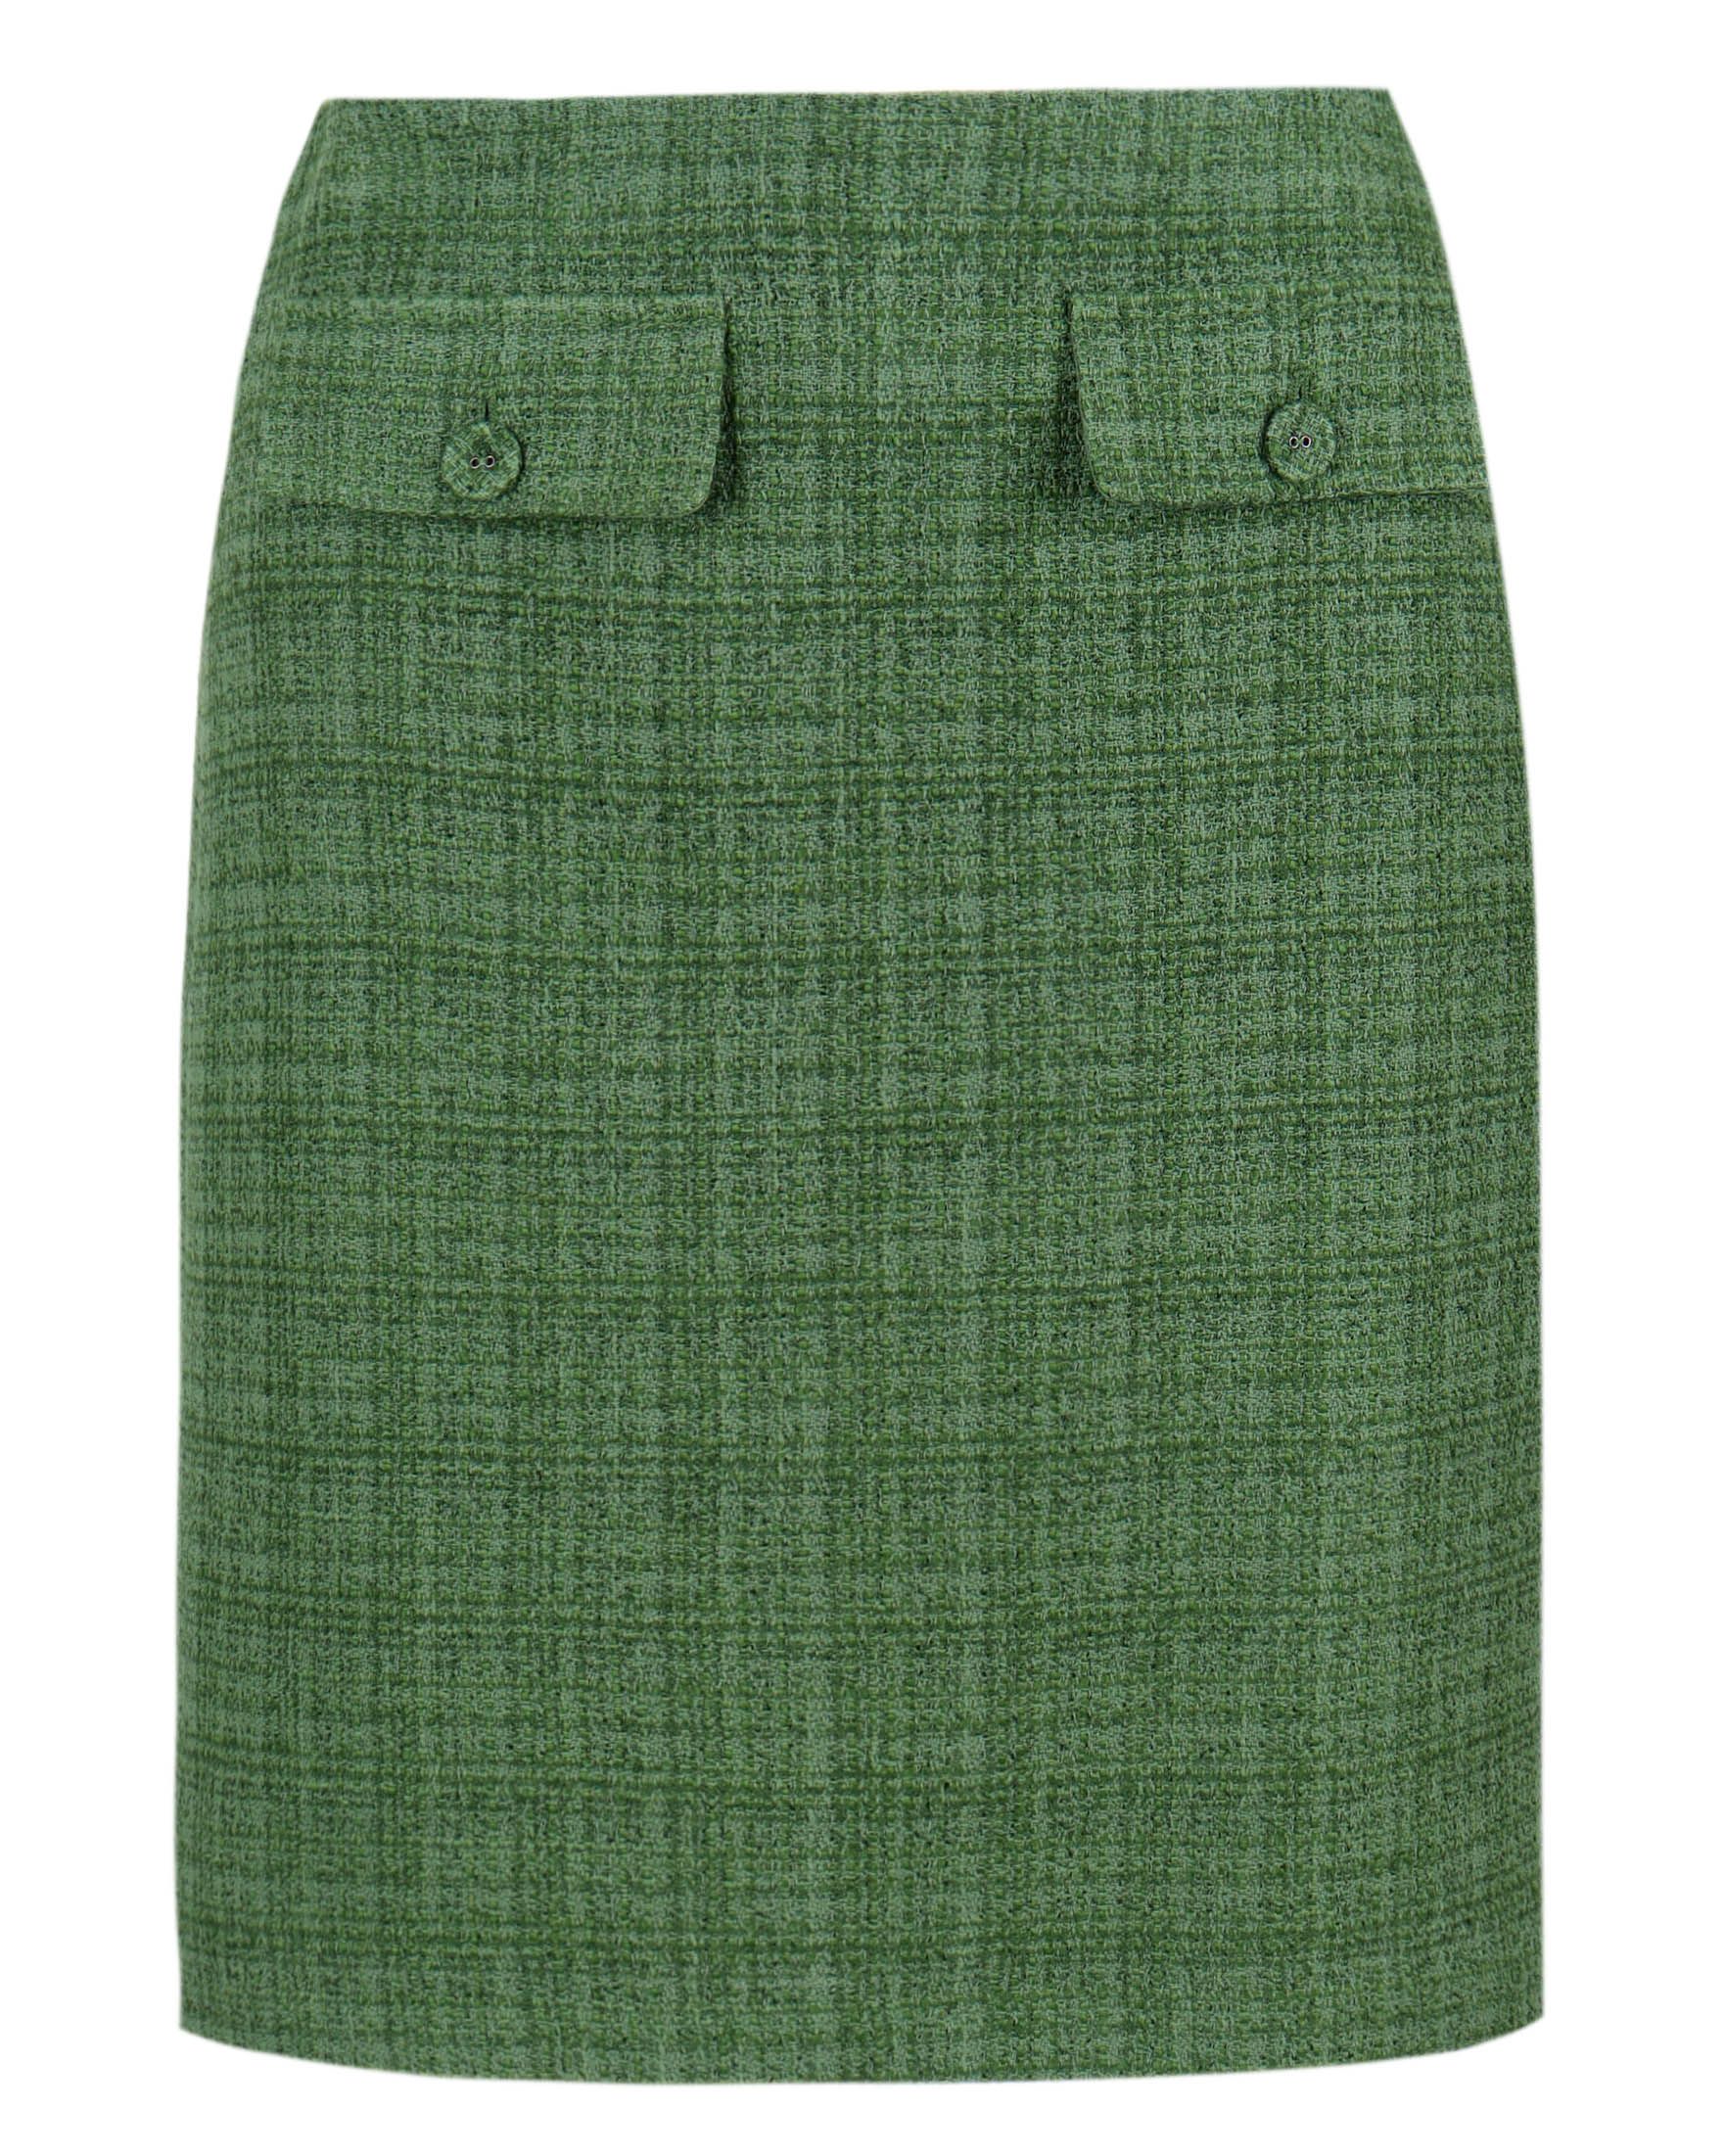 Tweed skirt, with cotton in the composition 0